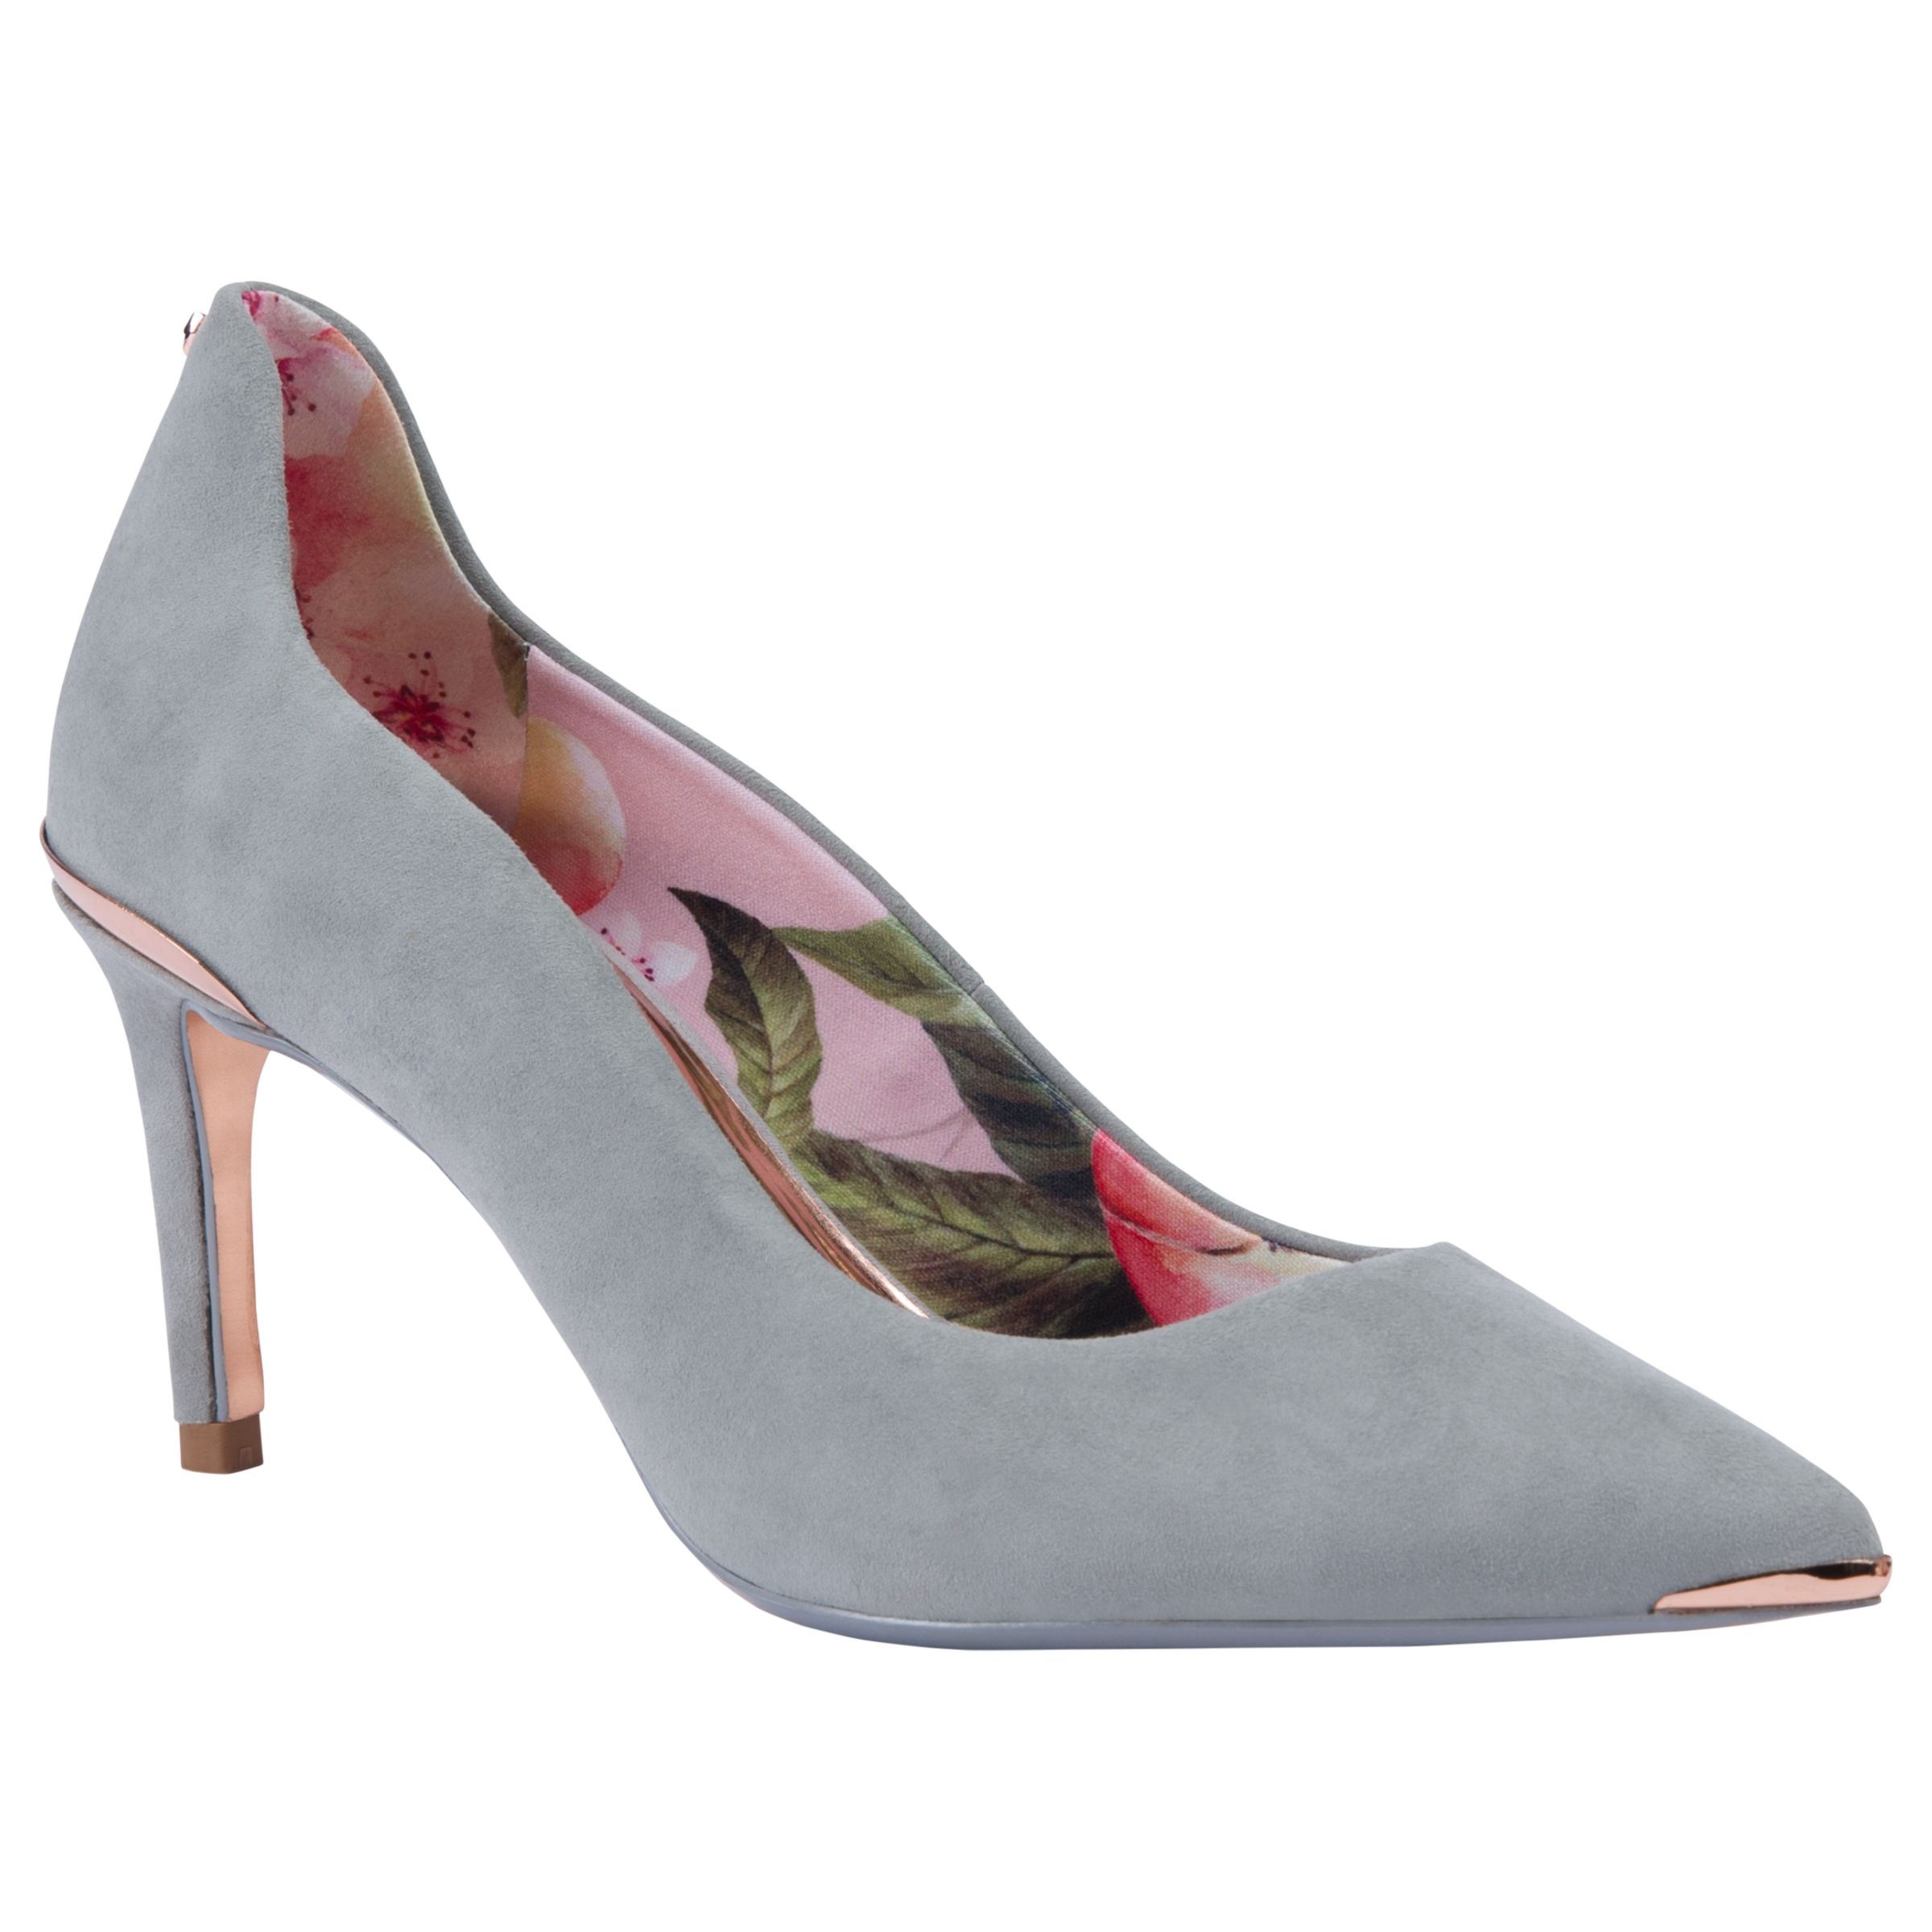 Ted Baker Vyixin 2 Court Shoes, Grey Suede